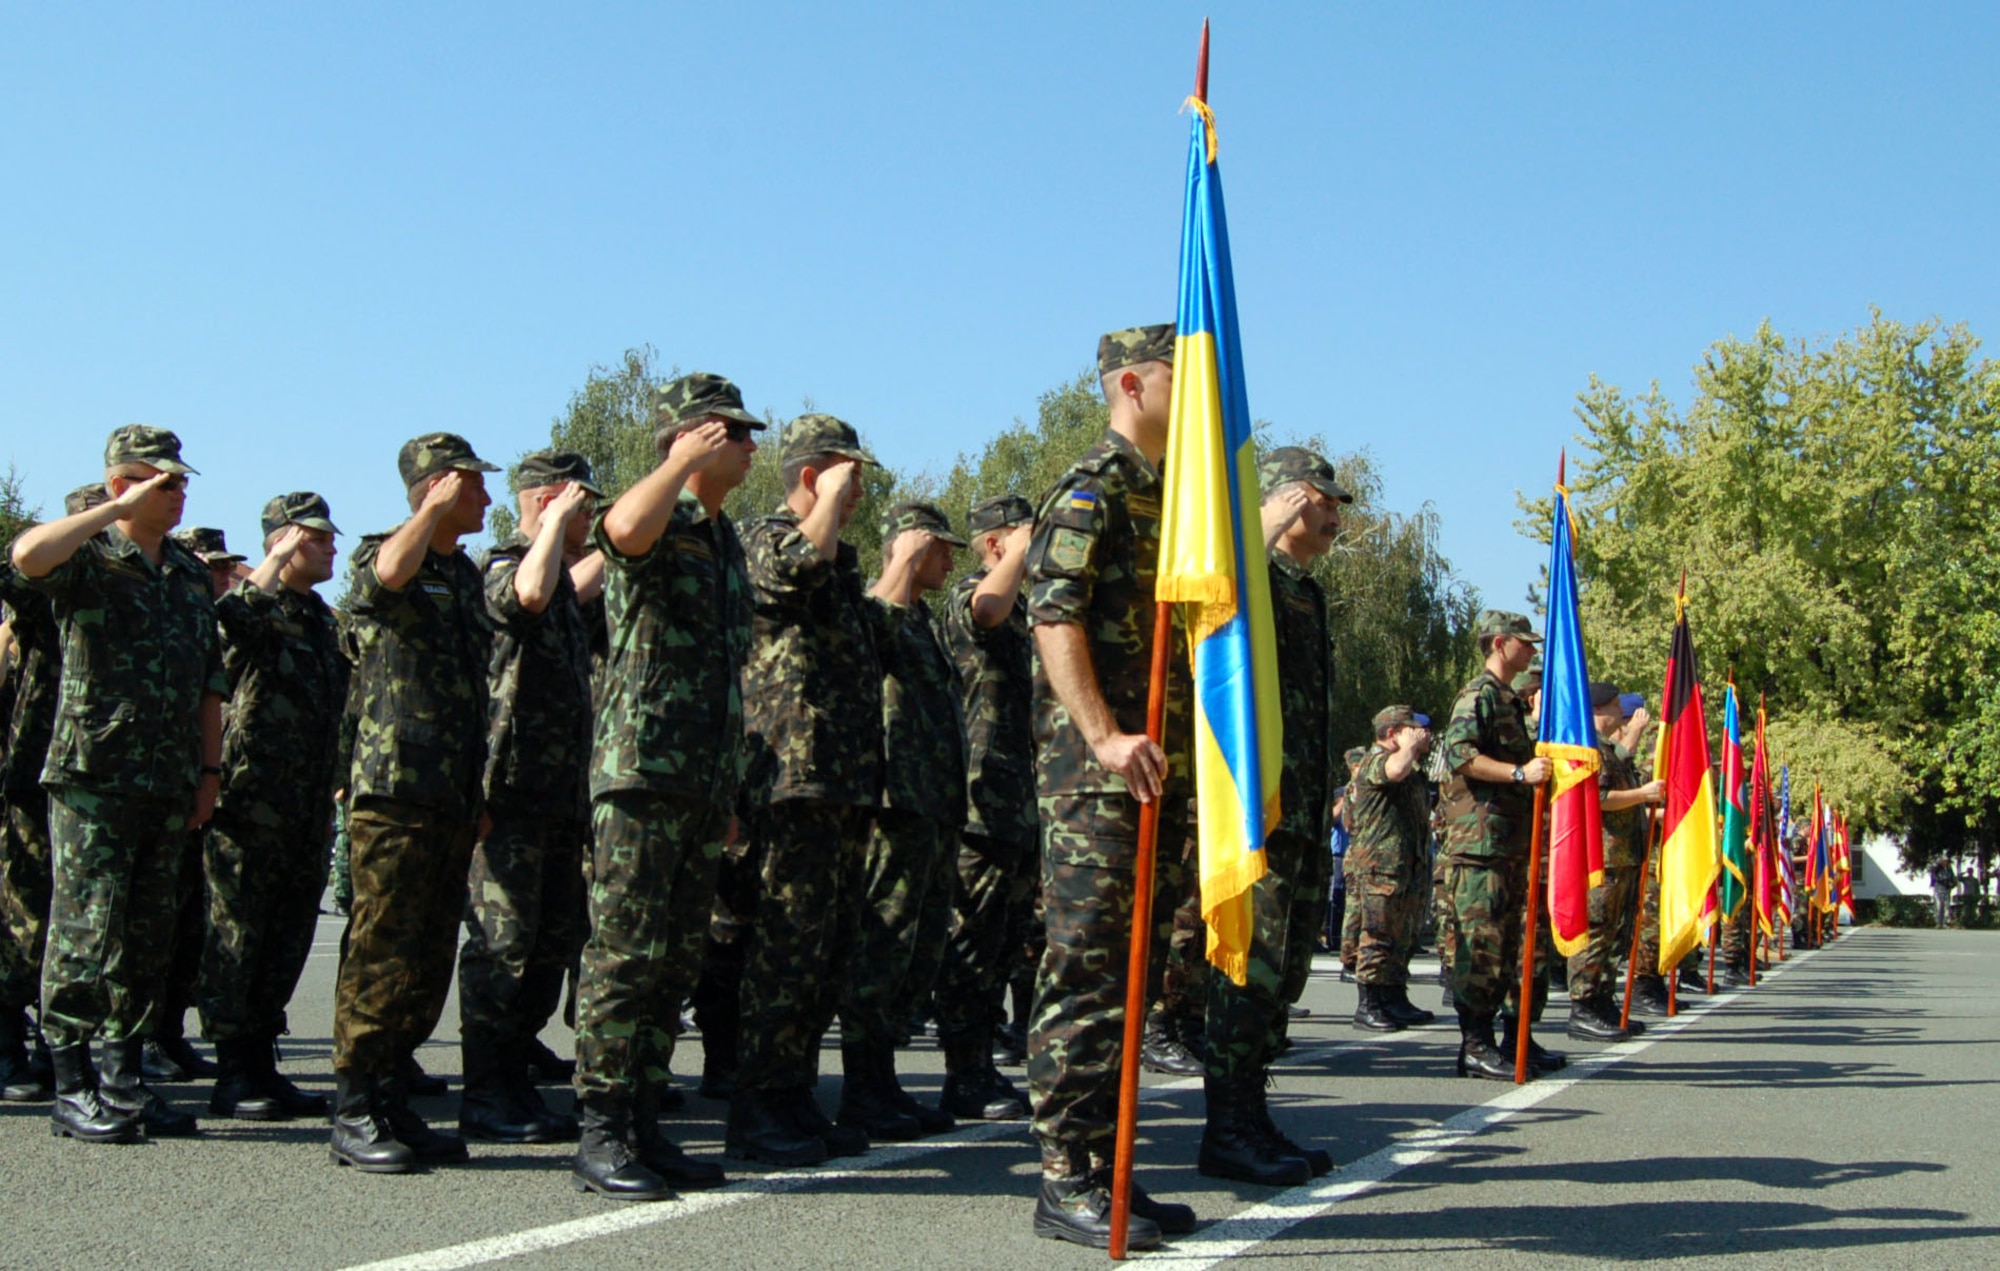 NIS, Serbia – Military members from 15 nations salute as the Serbian and American national anthems are played at the military medical training exercise in Central and Eastern Europe, or MEDCEUR 2009, opening ceremony Sept. 2 at the Knjaz Mihailo Barracks here. Serbia is the host nation for the exercise, while the U.S. is a major supporter of set-up, events and tear-down of the exercise which will run Sept. 2-13. (U.S. Air Force photo/Senior Airman Kali L. Gradishar)